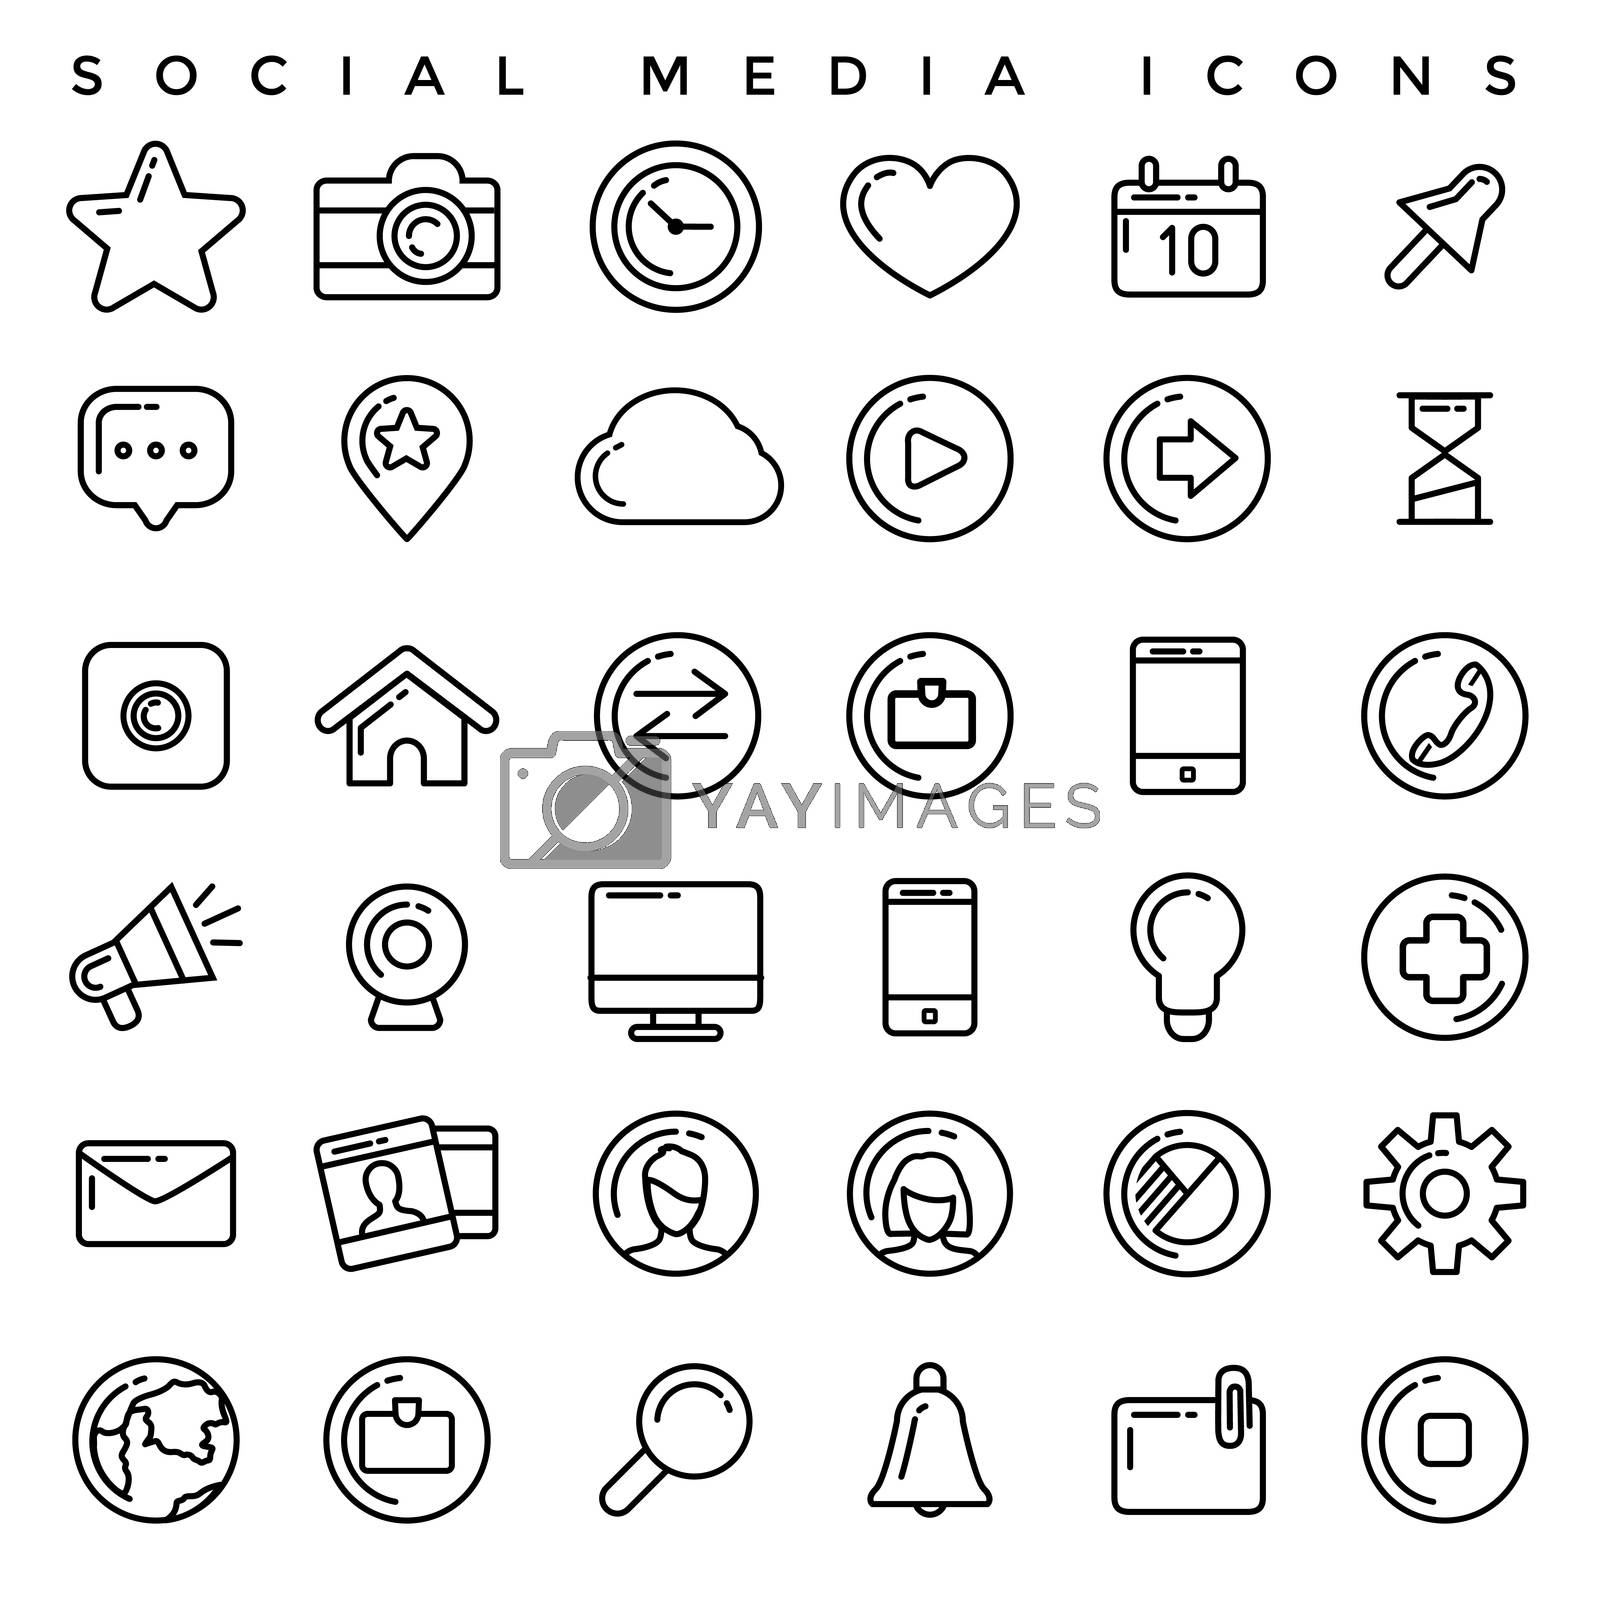 Royalty free image of Social Media Icons Set by ConceptCafe